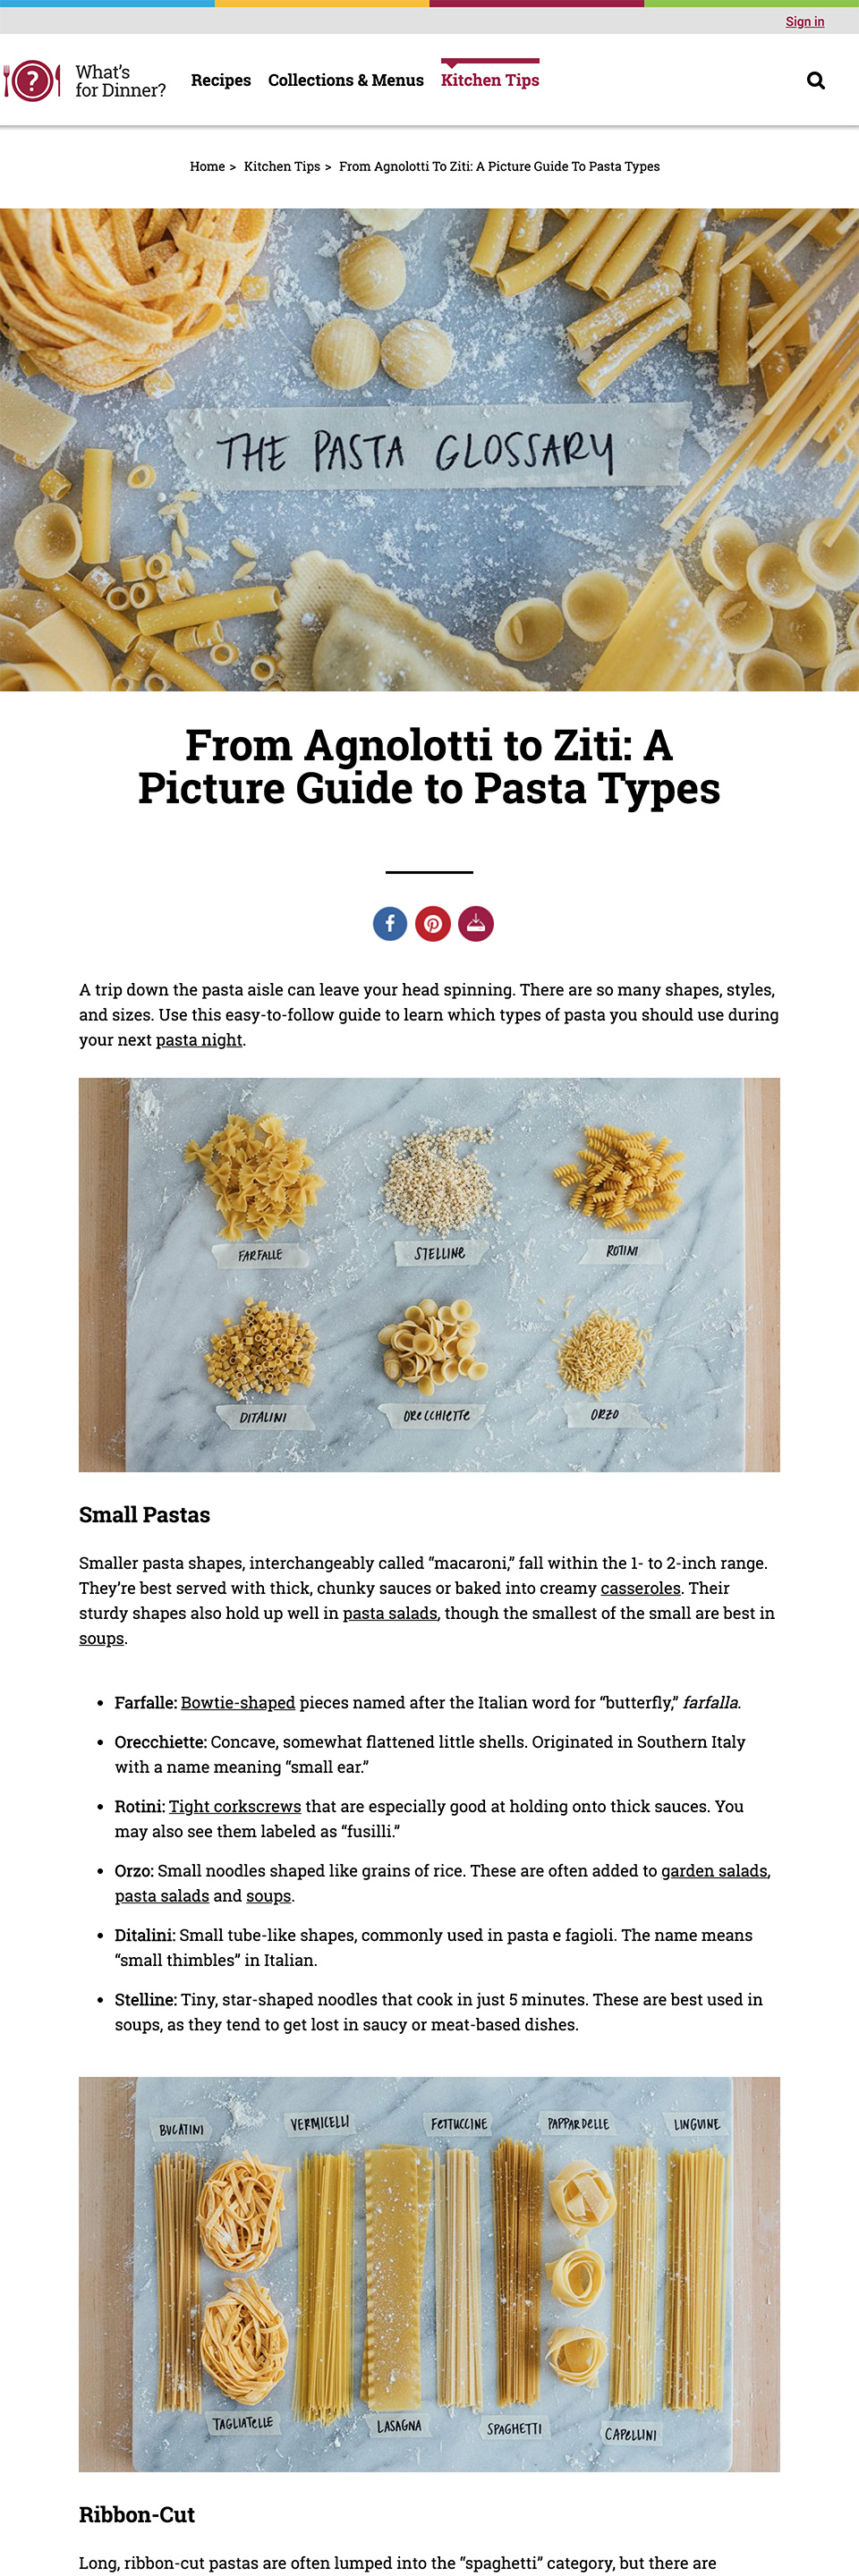 Whats-For-Dinner--From-Agnolotti-to-Ziti-A-Picture-Guide-to-Pasta-Types